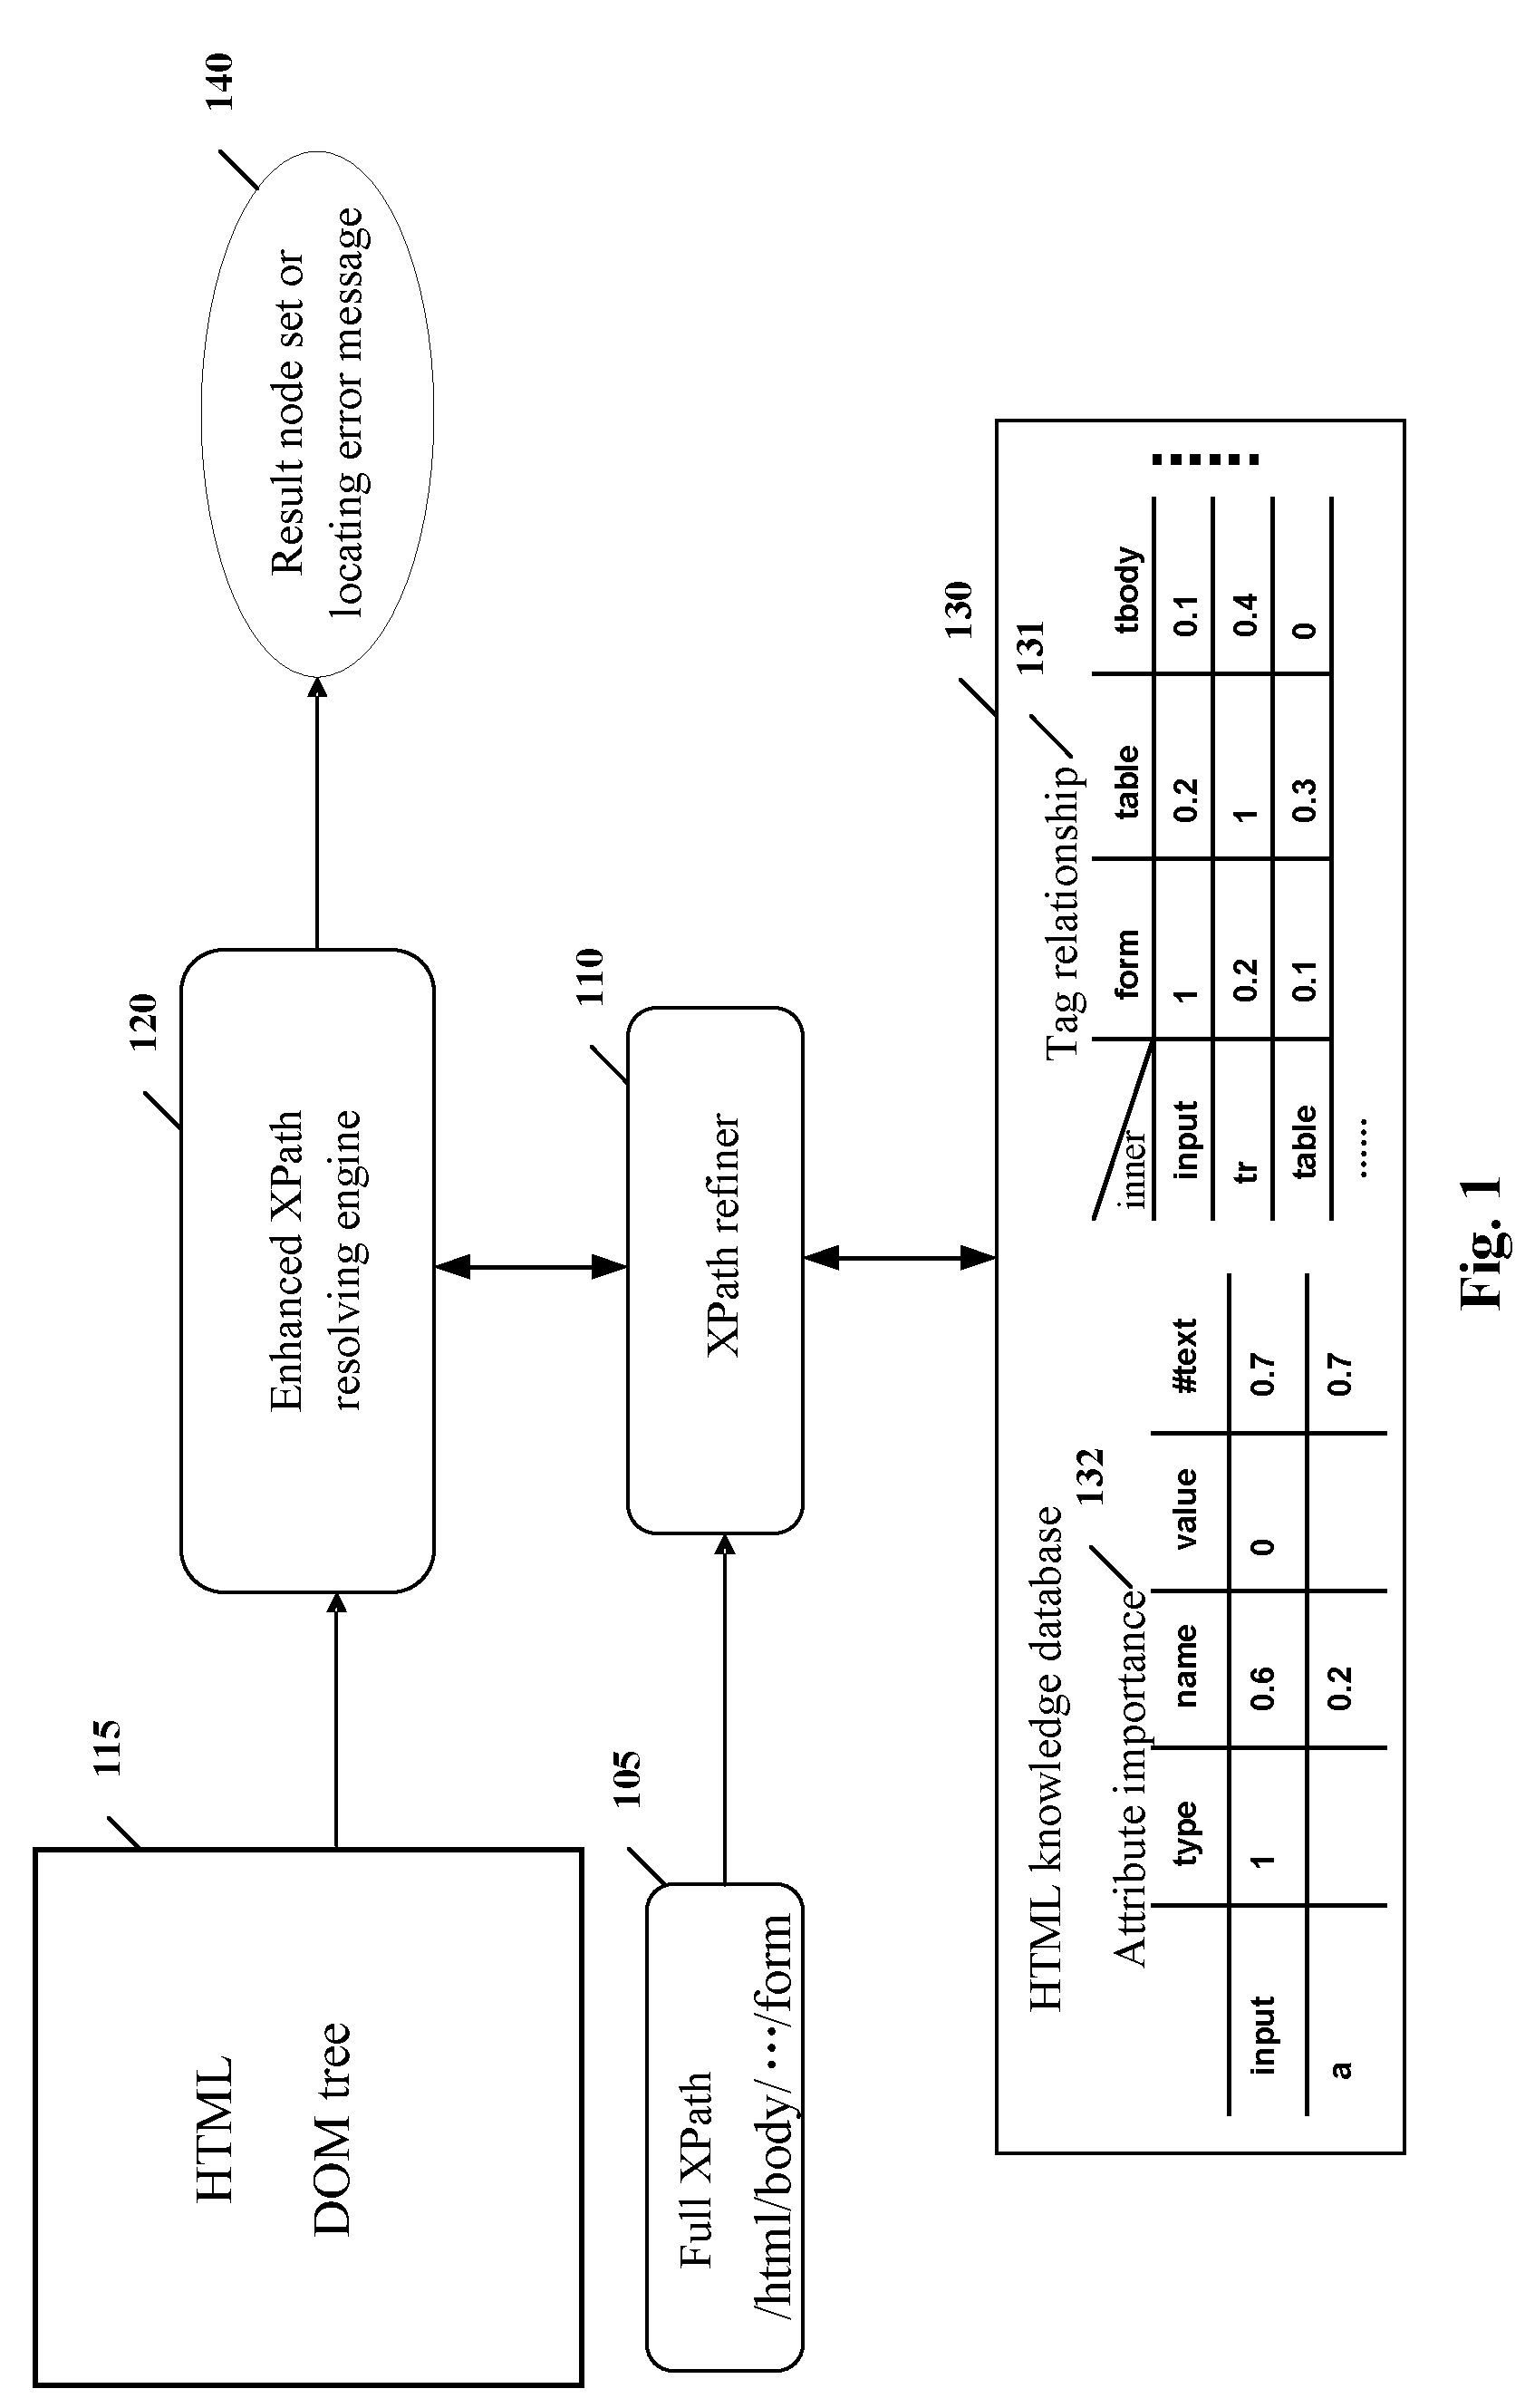 System and method for adaptively locating dynamic web page elements